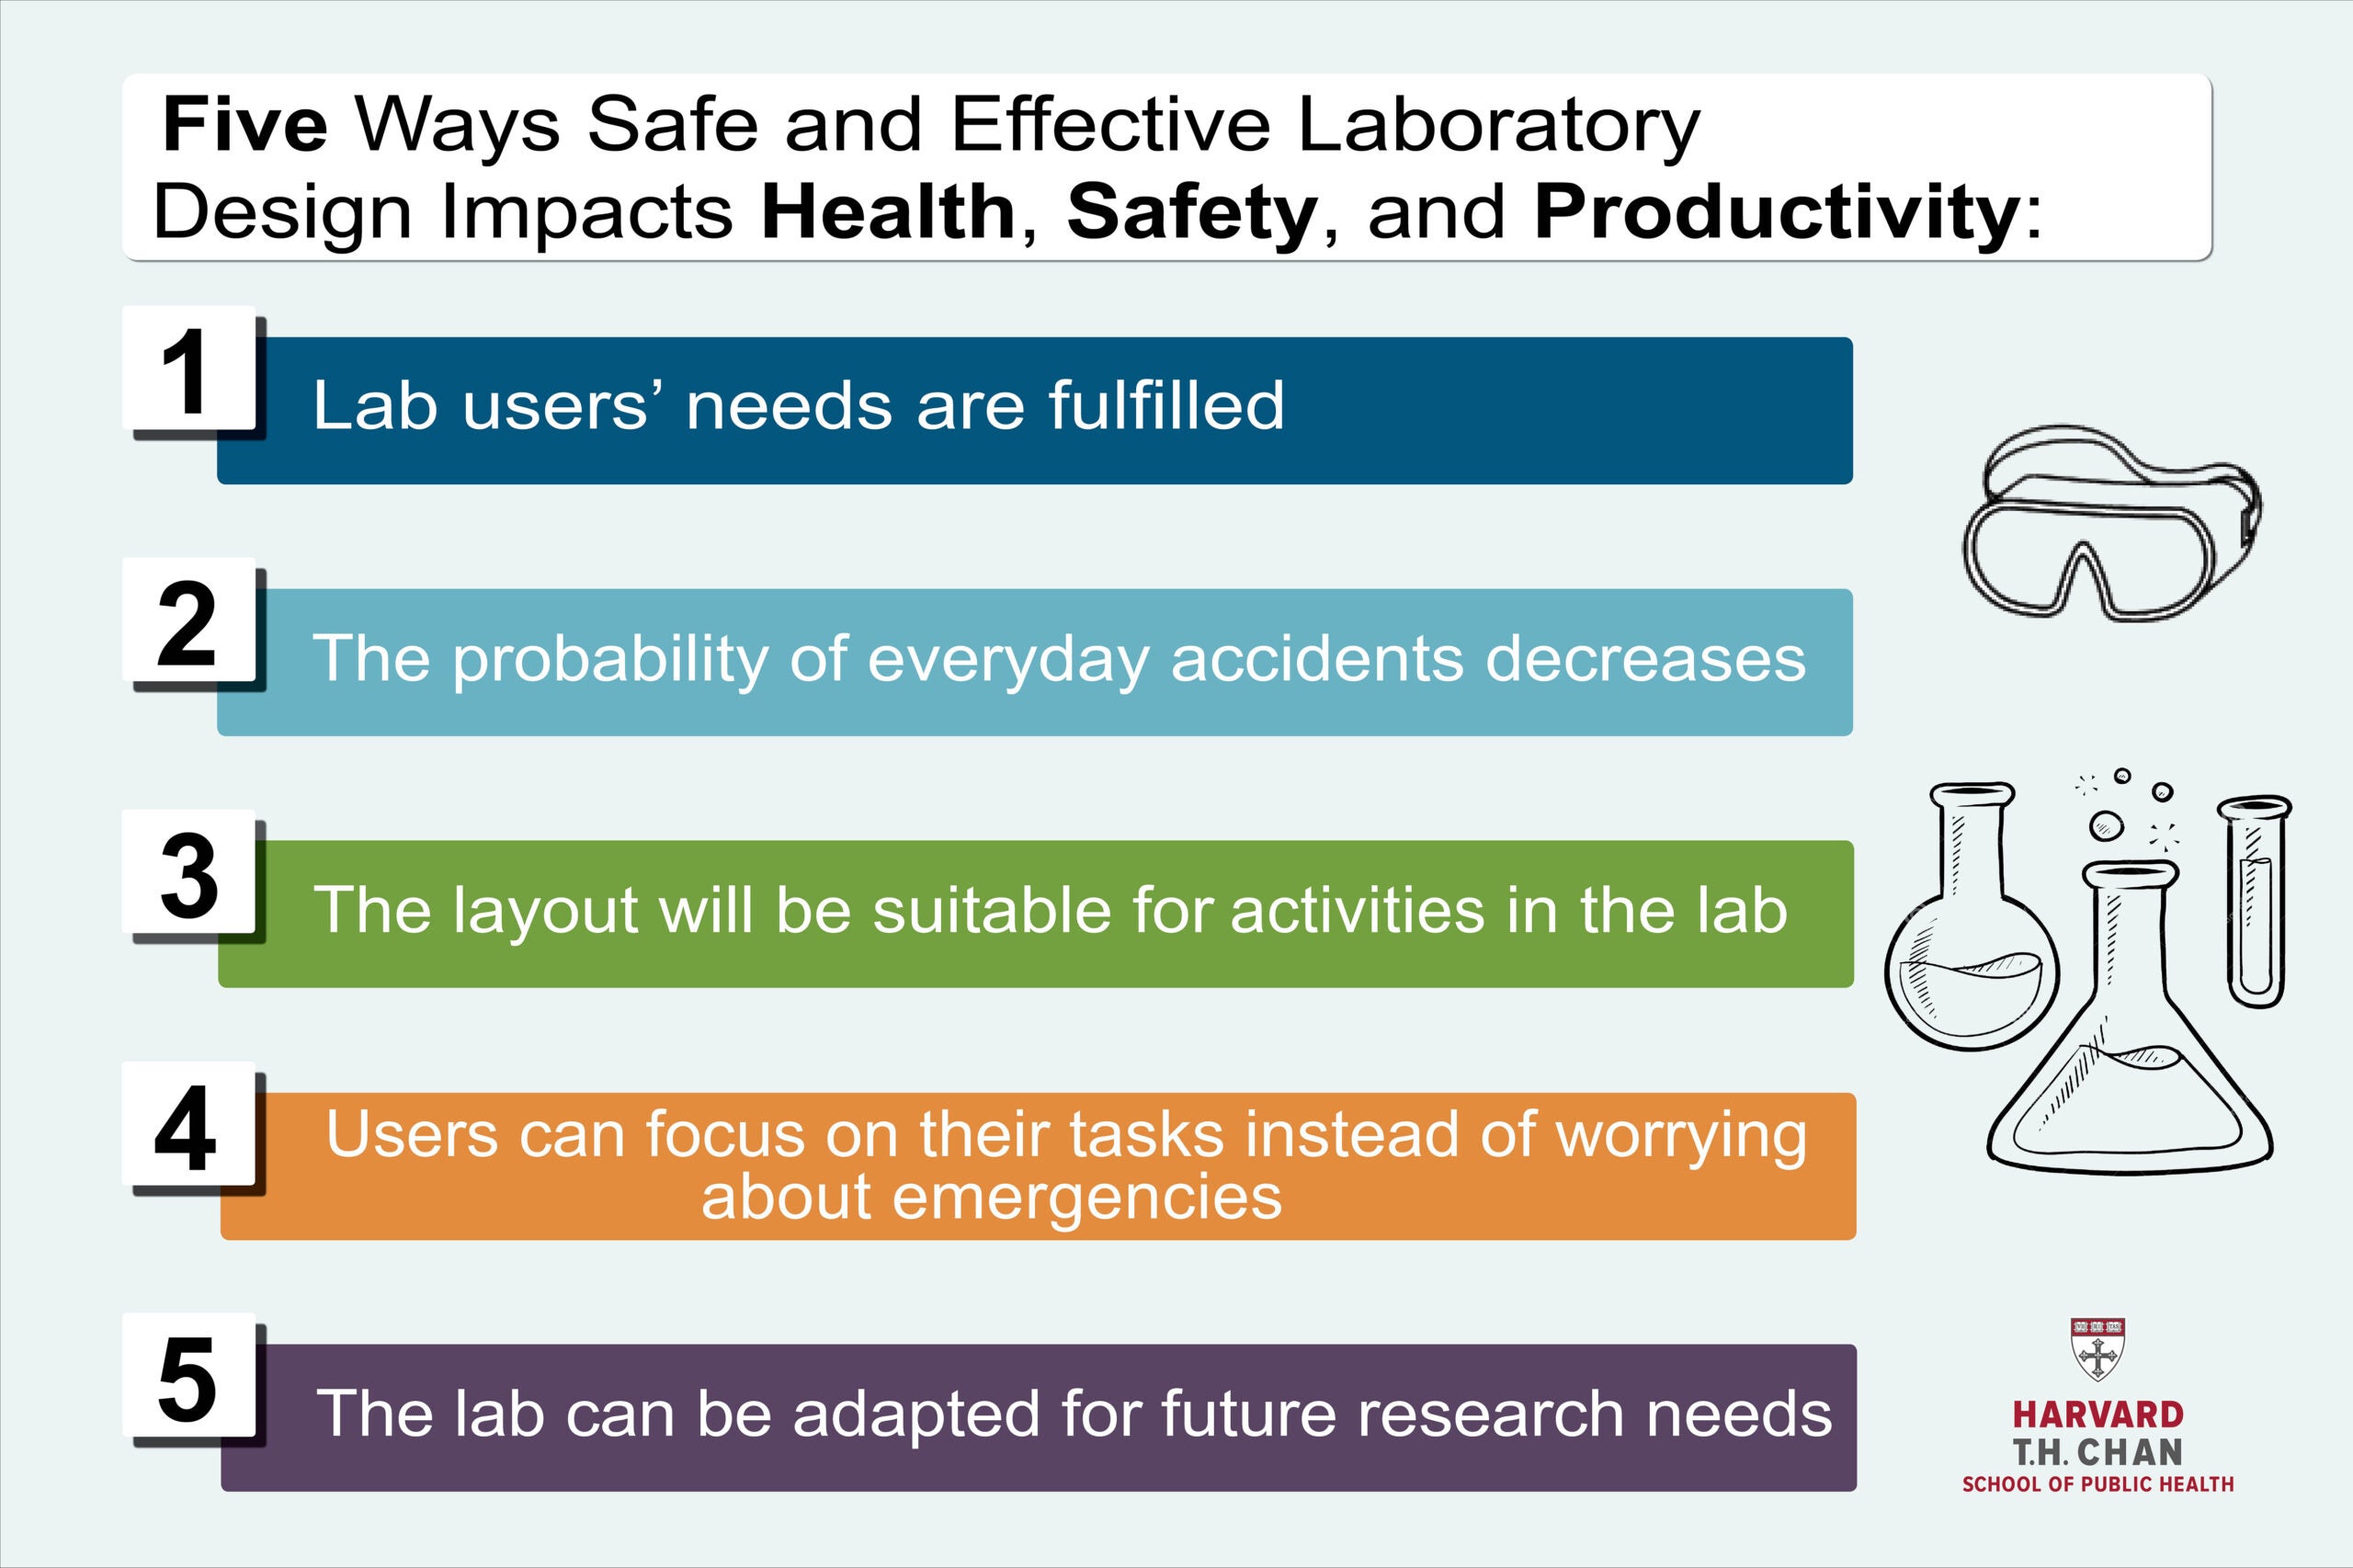 Five Ways Effective Laboratory Design Impacts Health, Safety, and Productivity